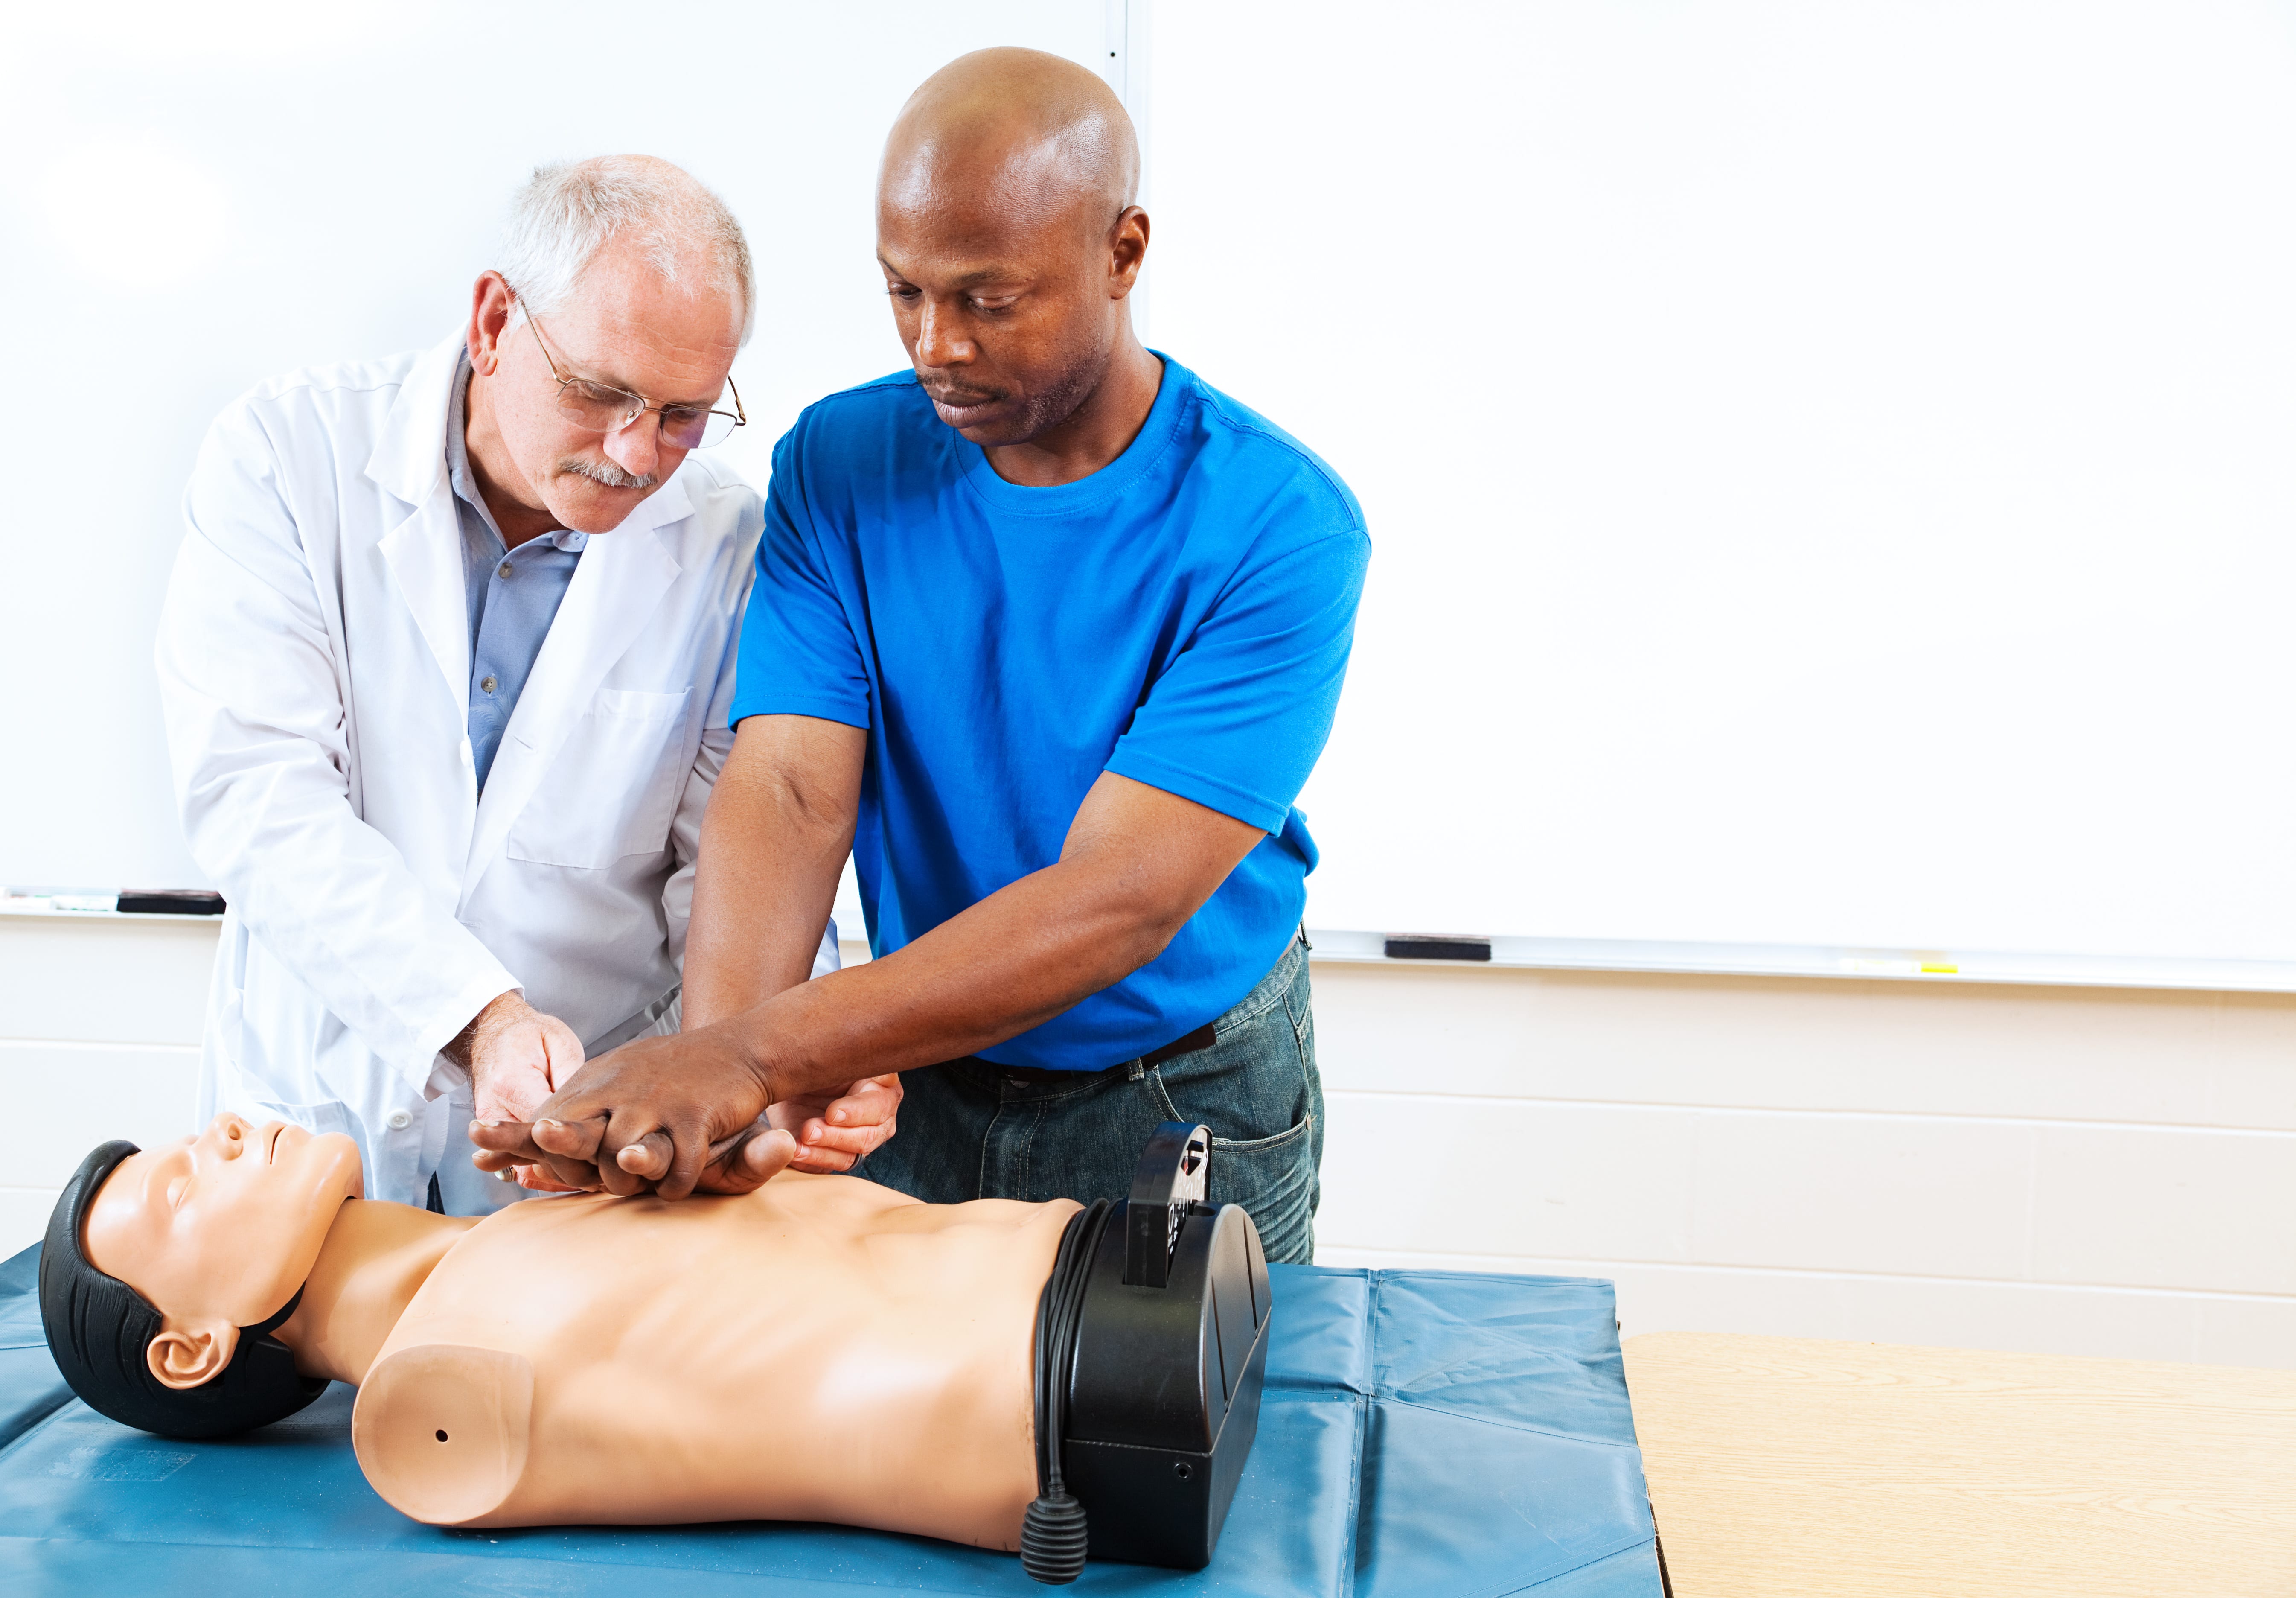 Image of Man Performing Hands Only CPR